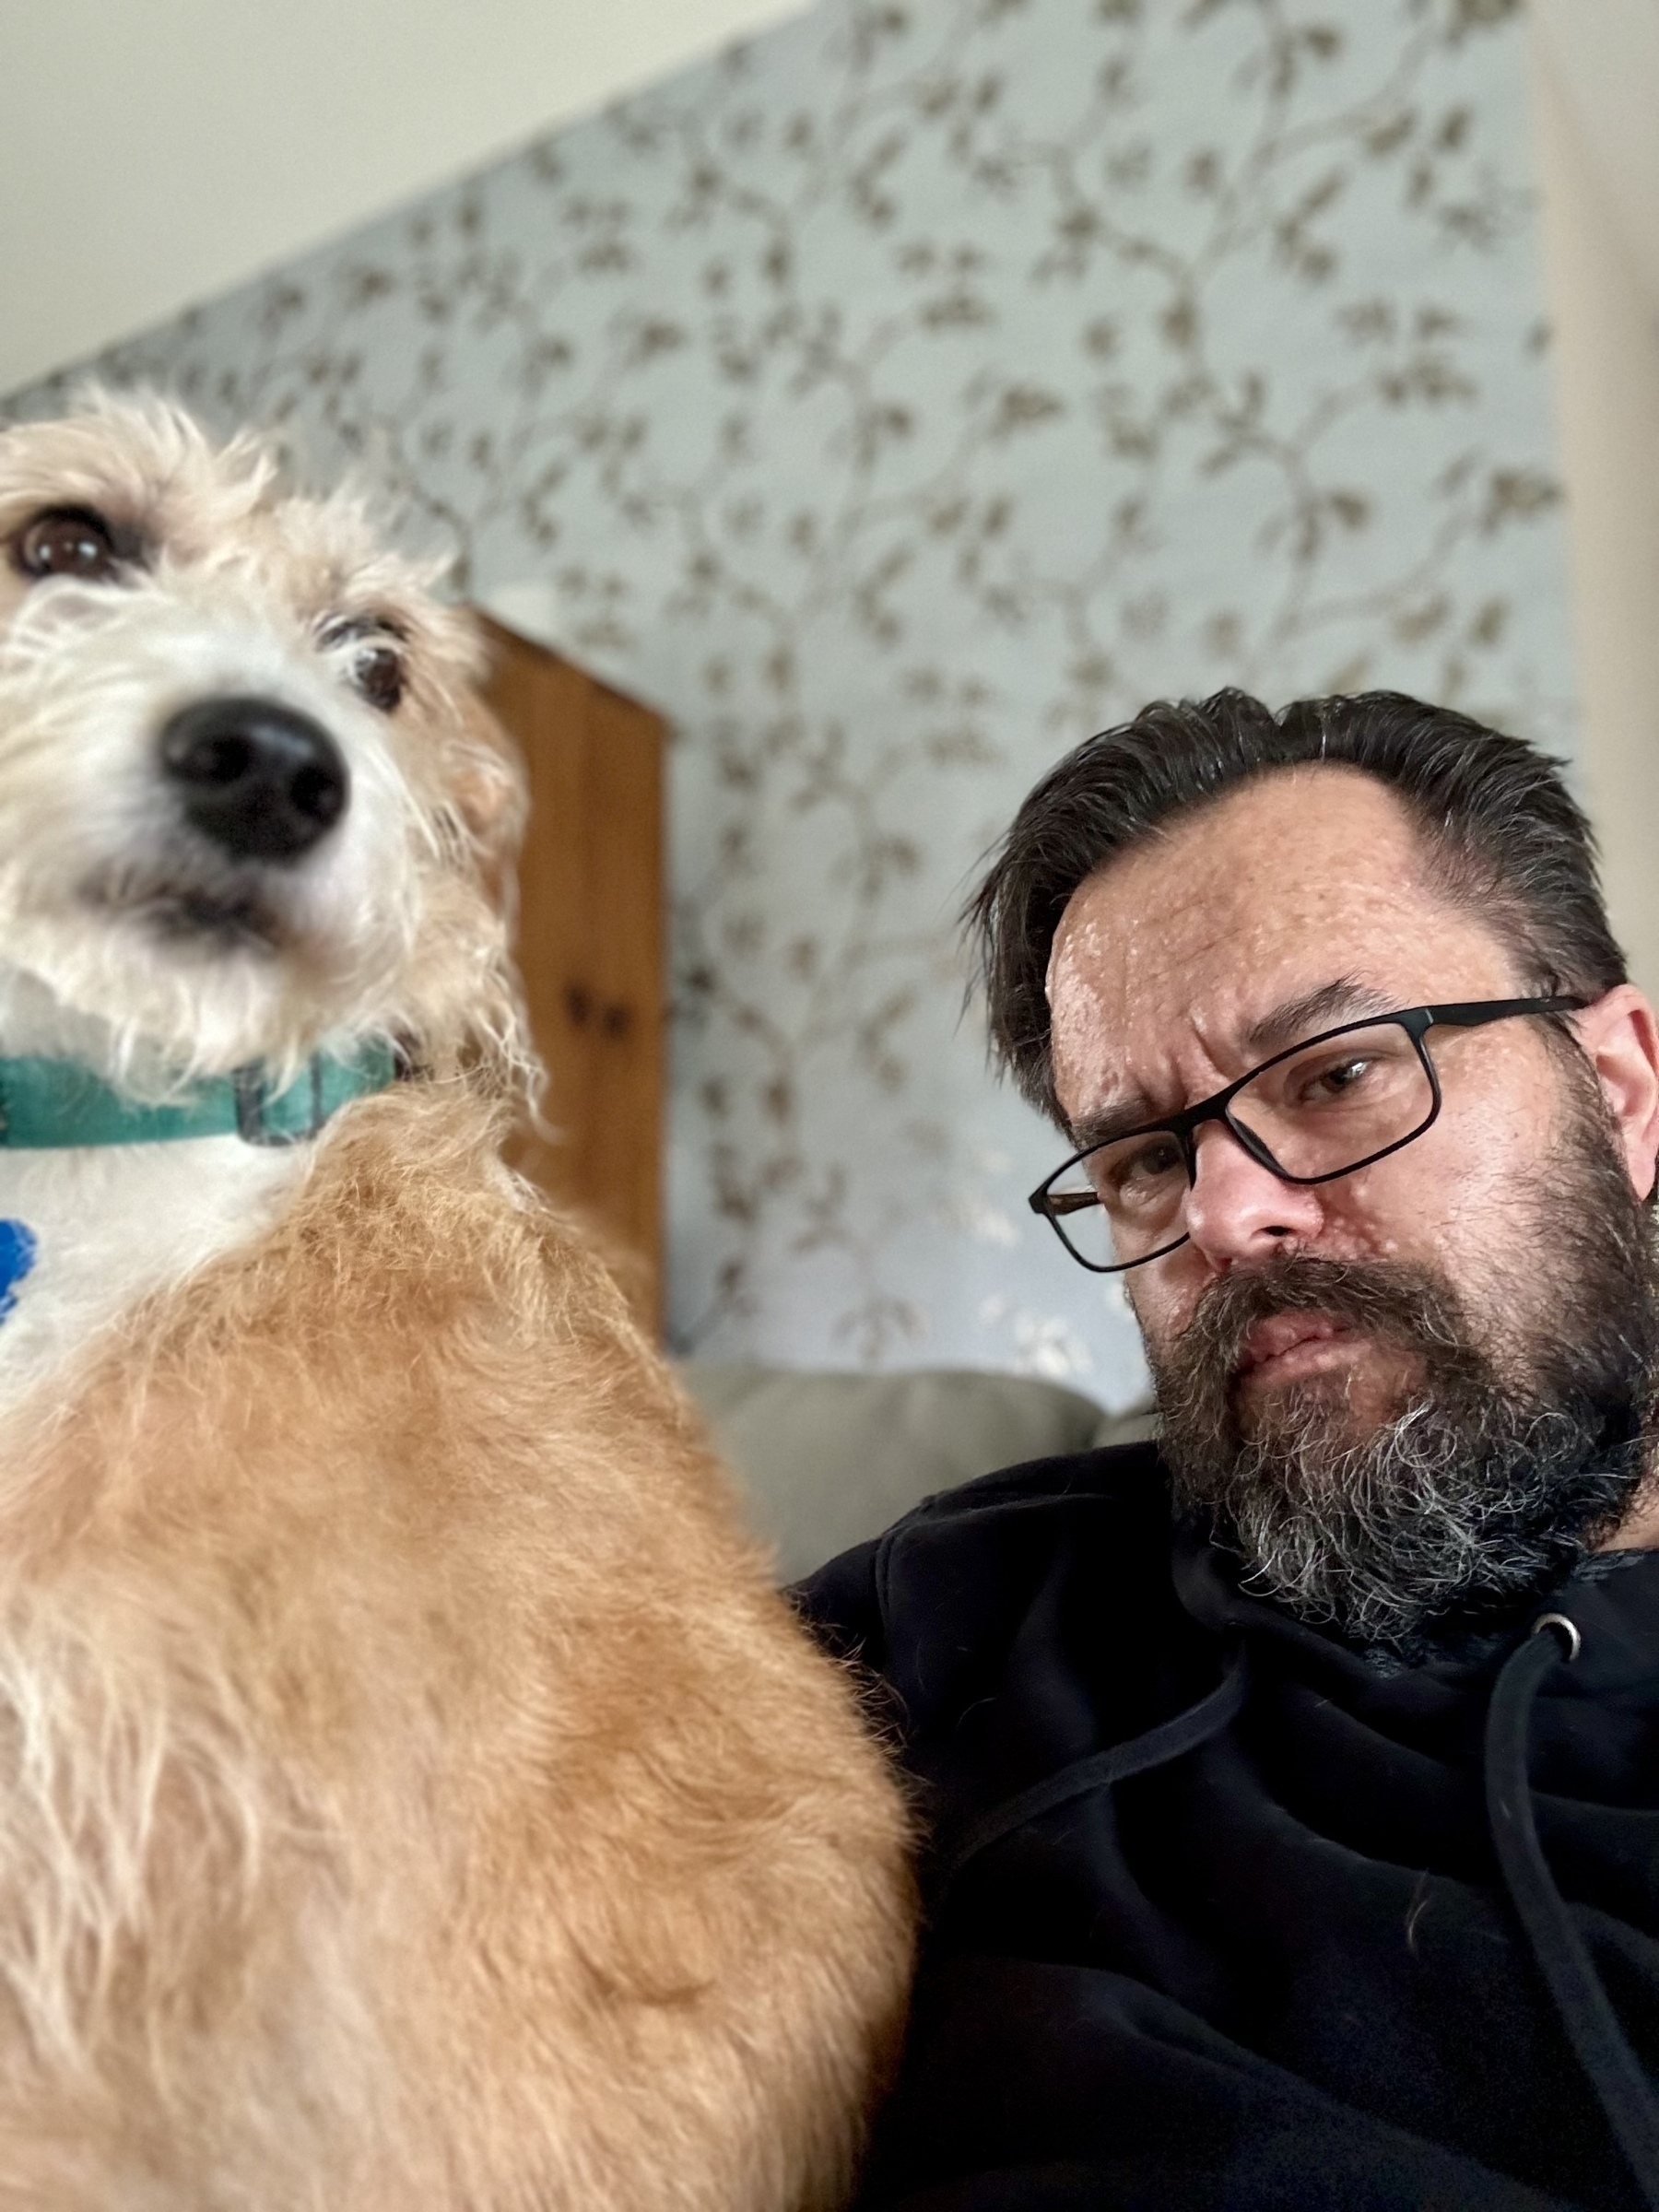 Shane the lurcher looks into the distance as a hairy faced man looks constipatedly into the lens. 